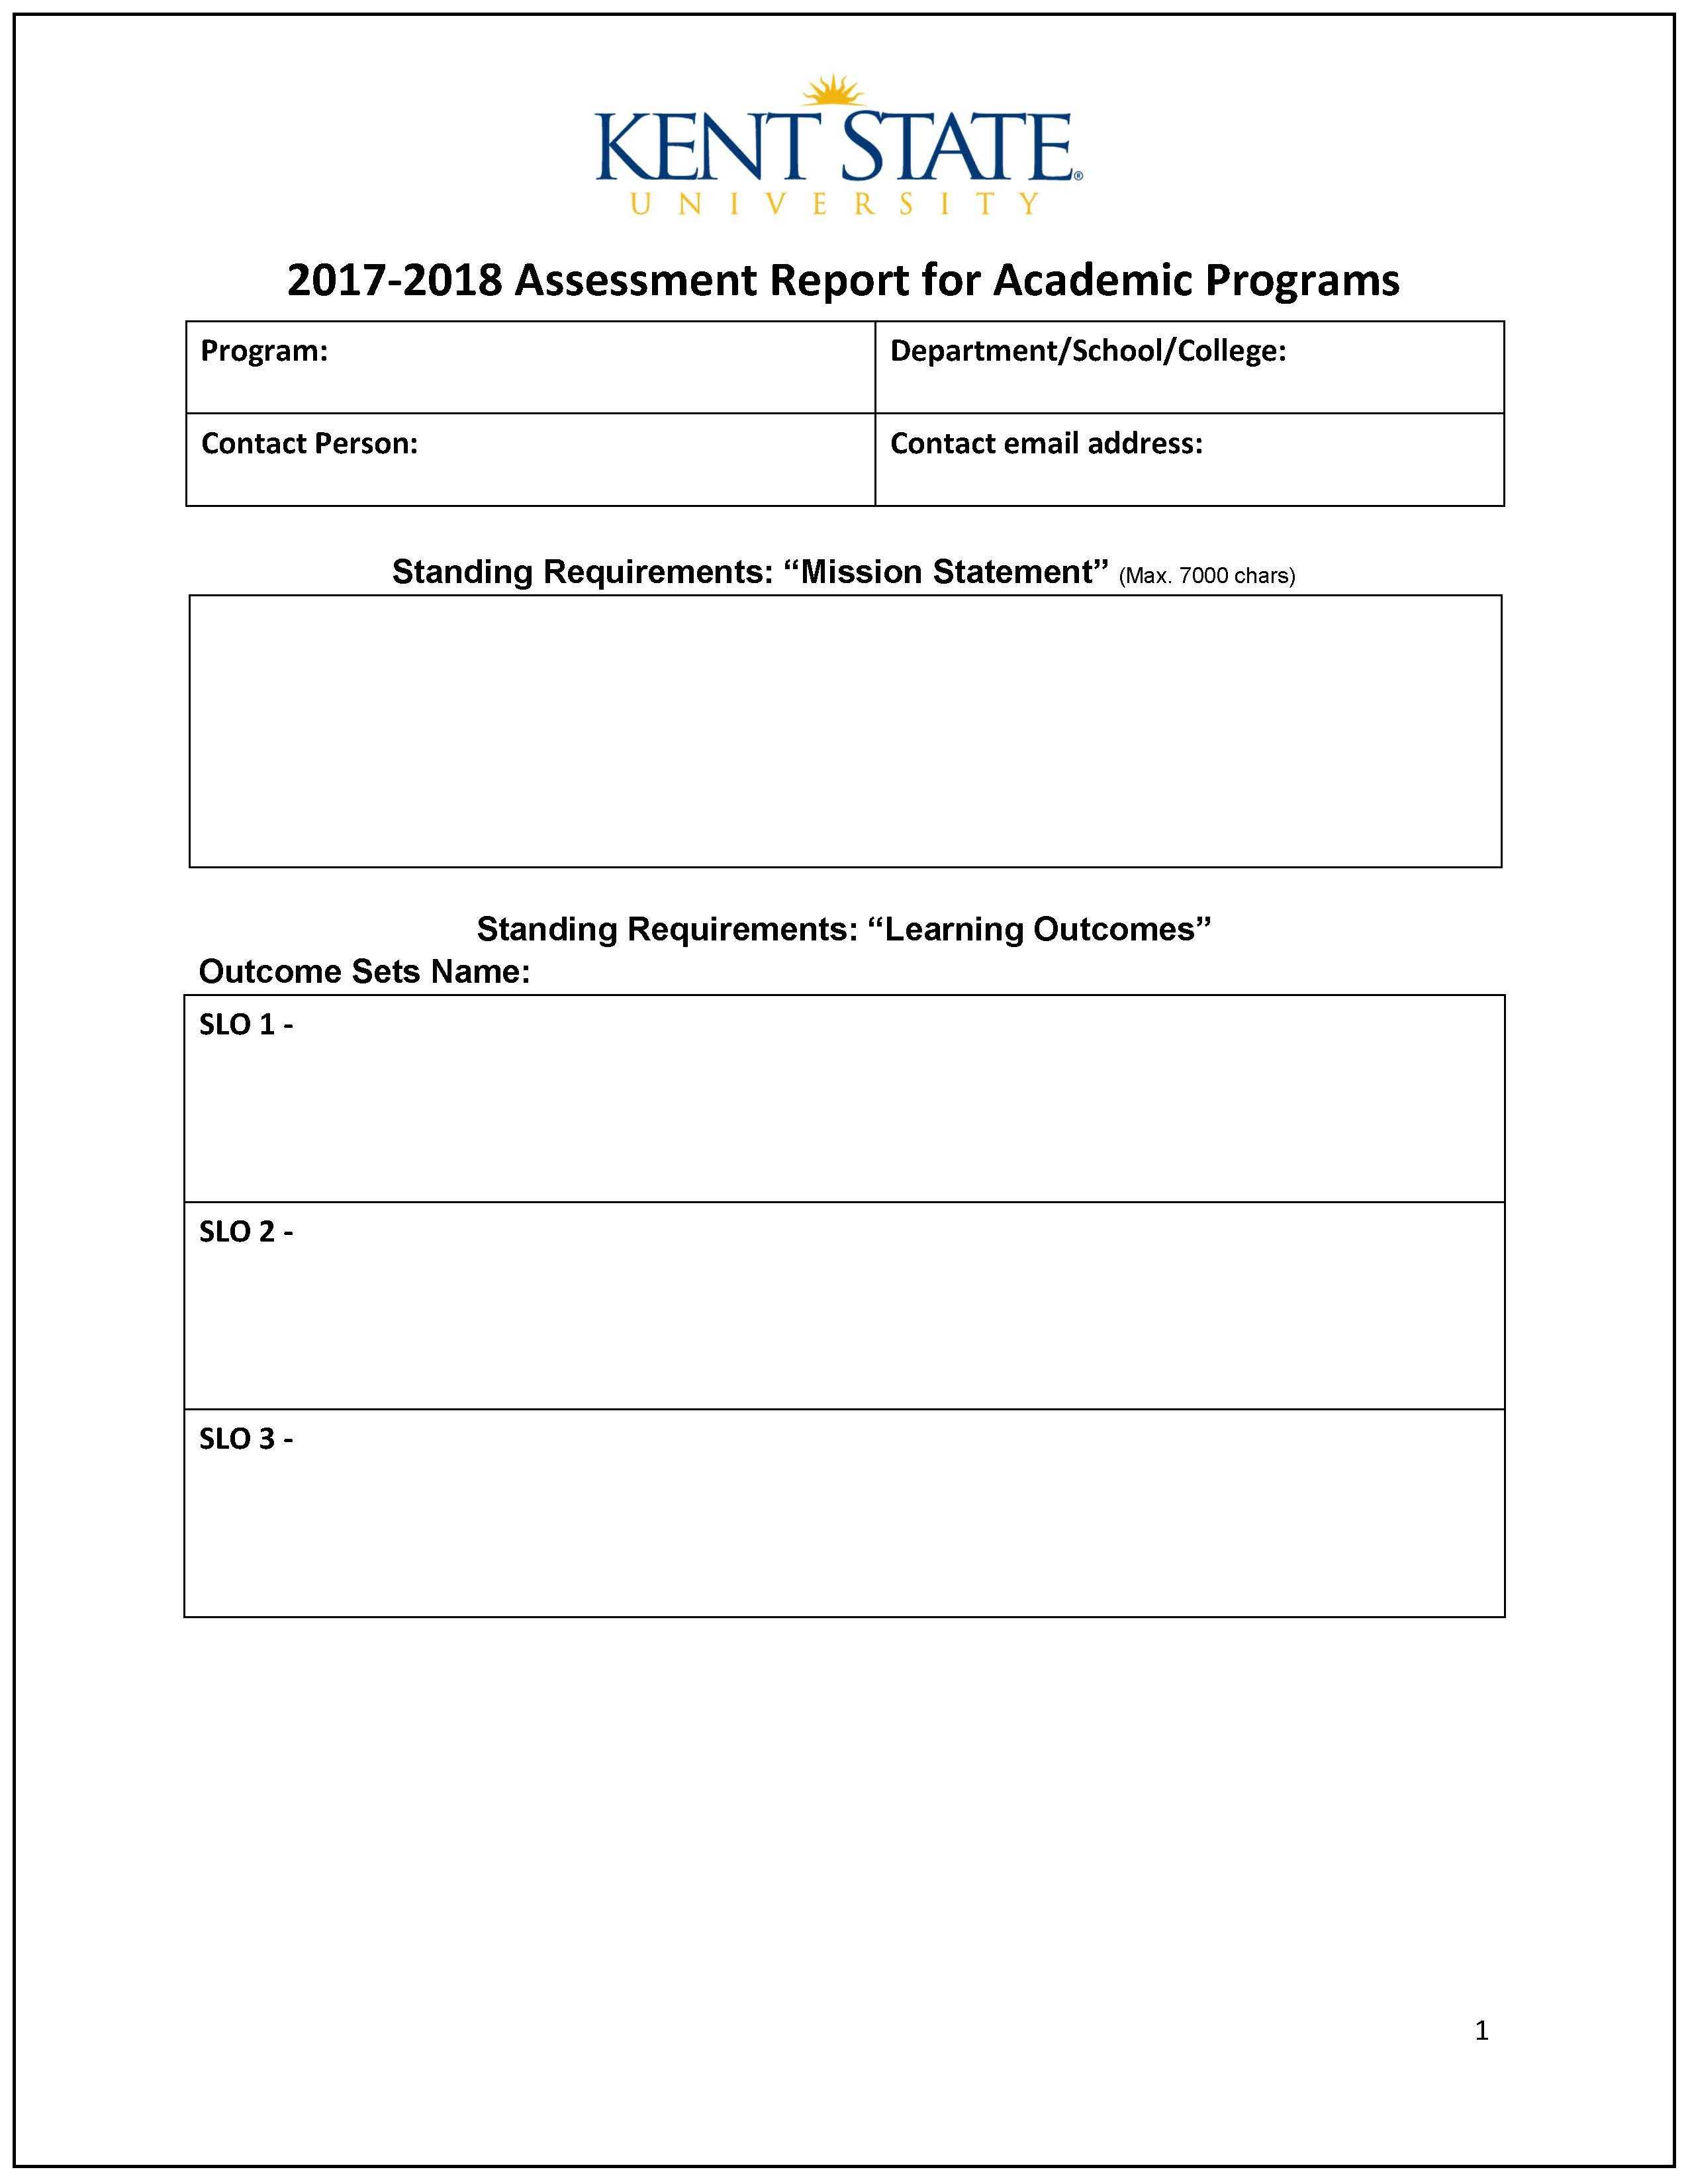 Assessment Report – Word Template | Accreditation With Regard To State Report Template